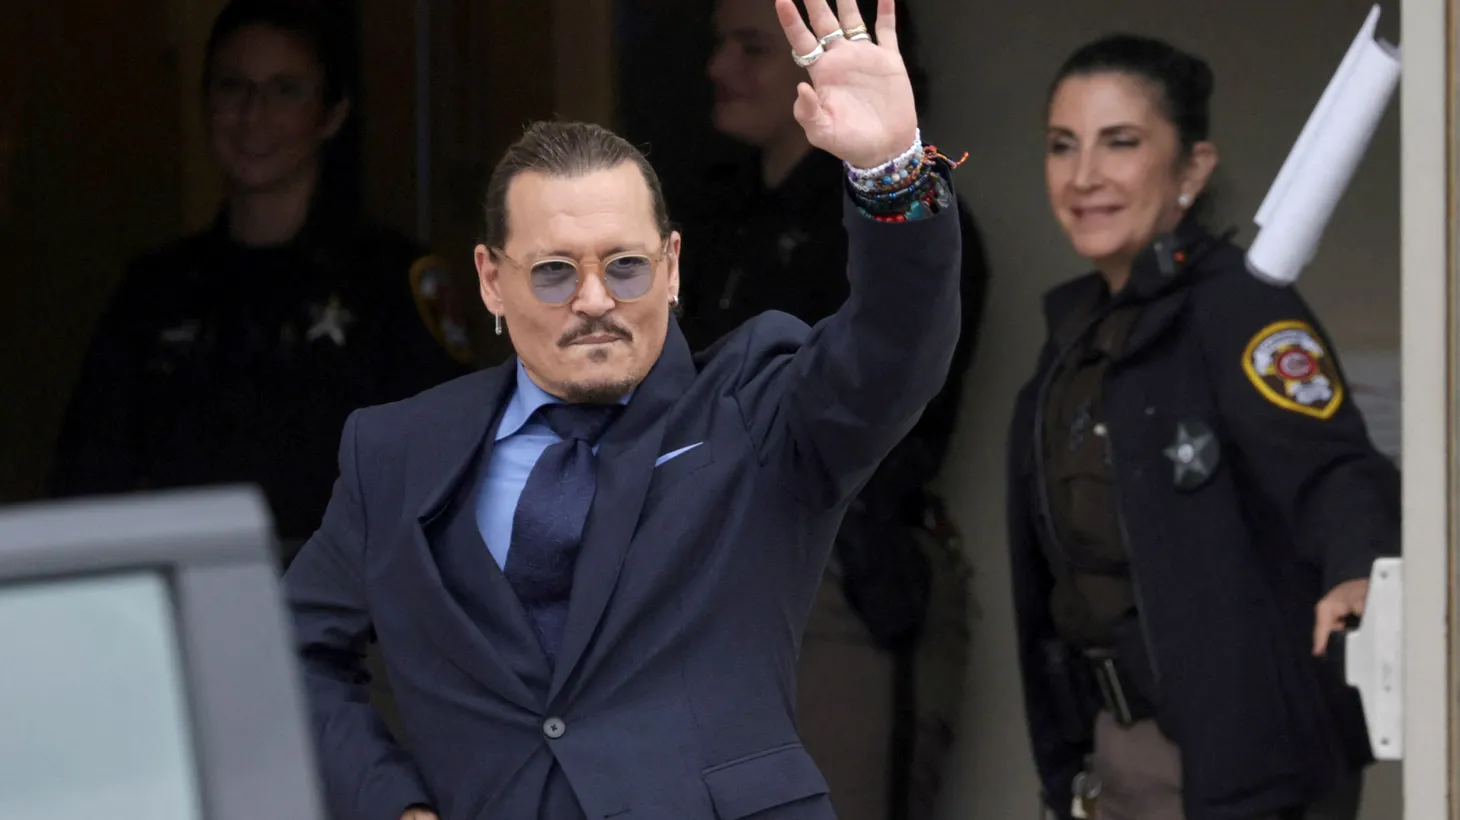 Actor Johnny Depp gestures as he leaves the Fairfax County Circuit Courthouse following his defamation trial against his ex-wife Amber Heard, in Fairfax, Virginia, U.S., May 27, 2022.